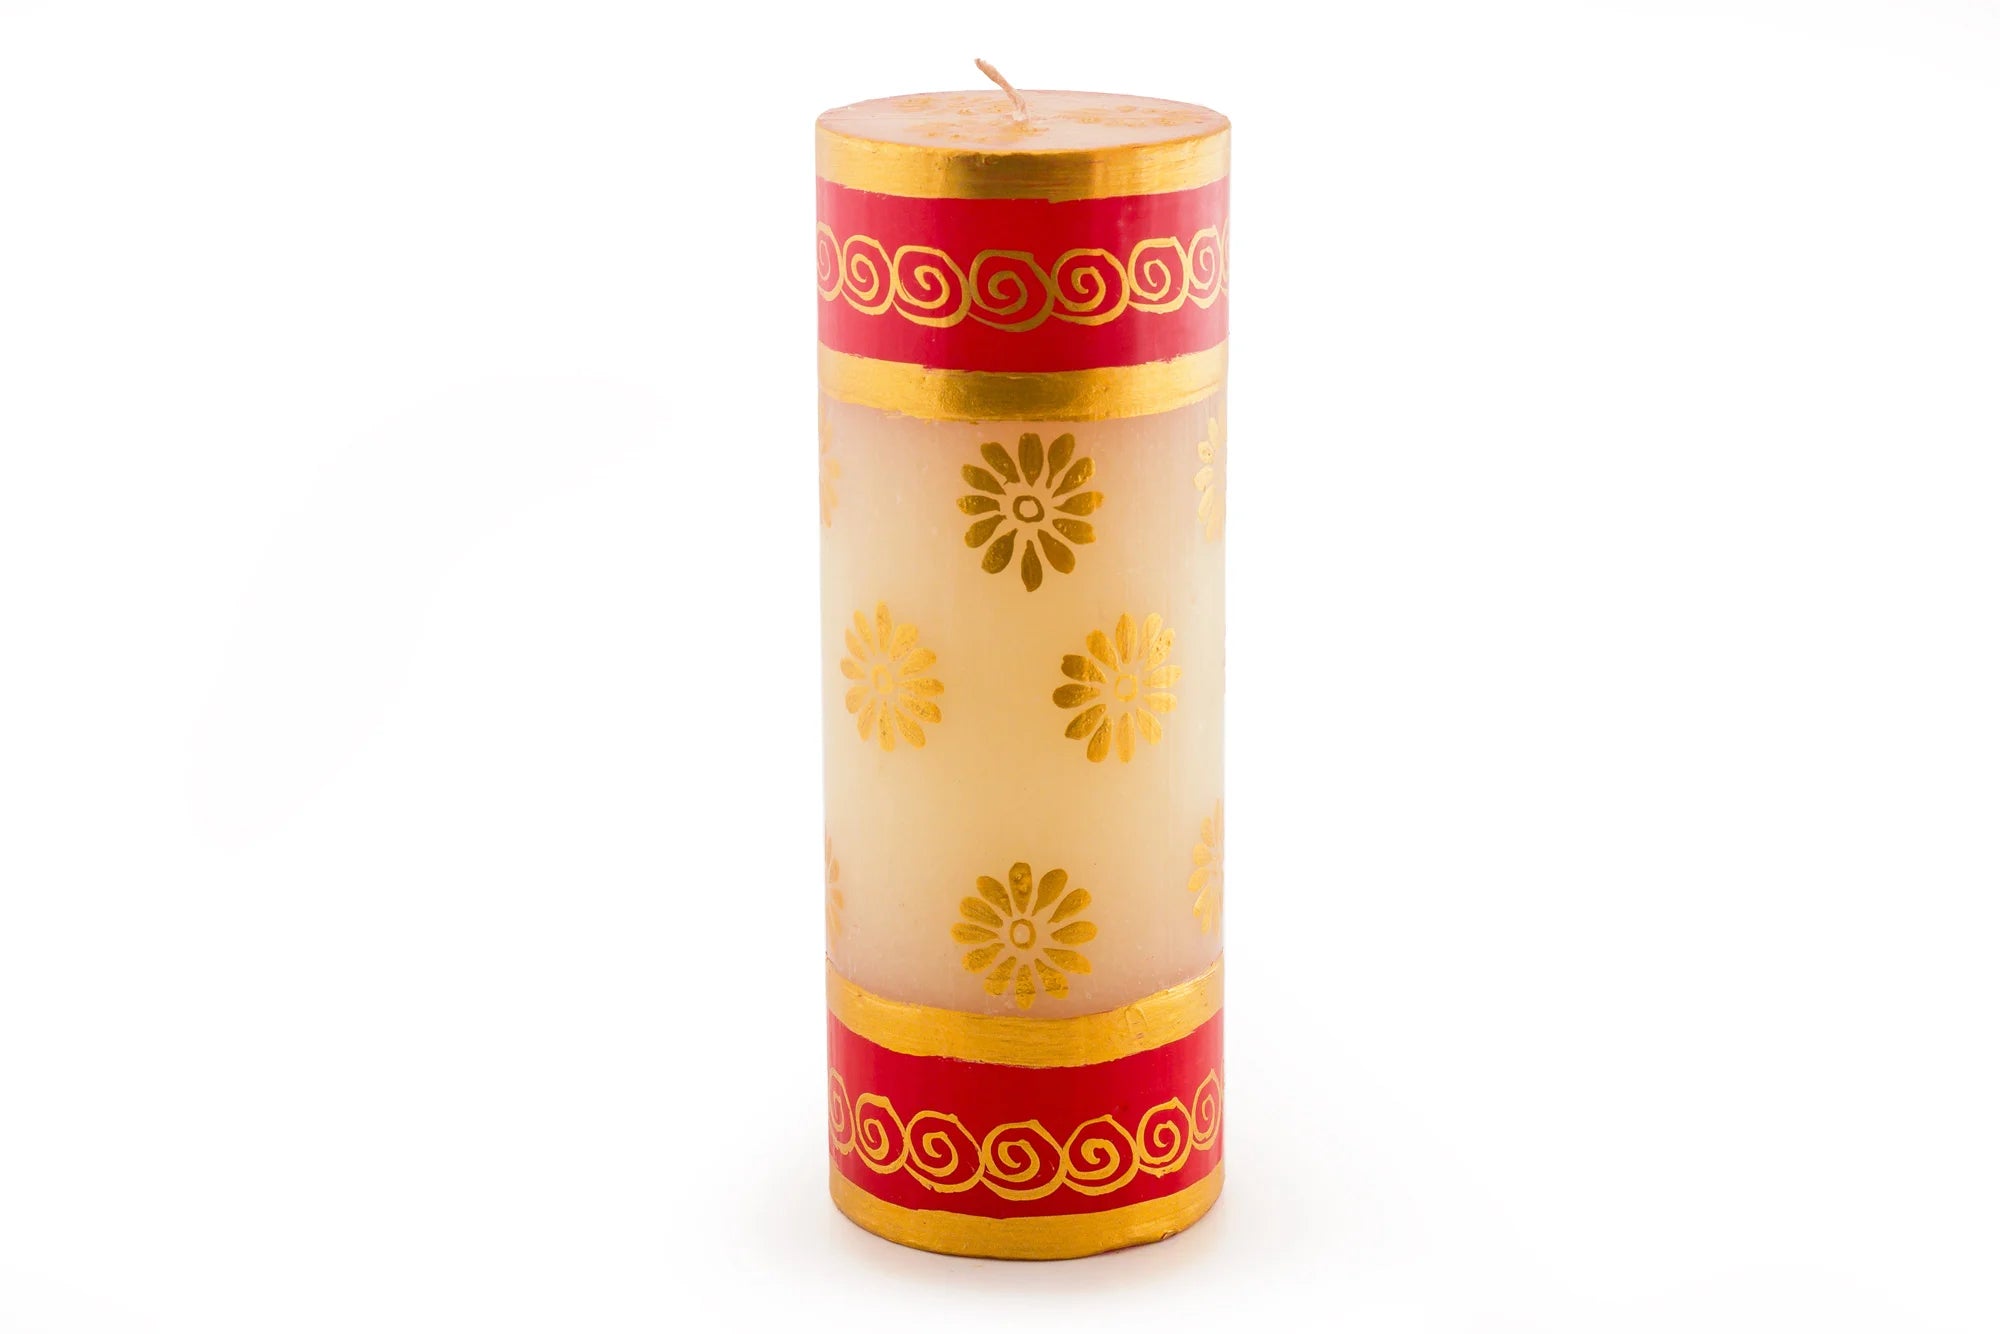 3" x 8" Christmas pillar in various traditional Christmas patterns in red, dark green, light green and gold. This pillar is painted with gold flowers and a red boarder at the top & bottom.